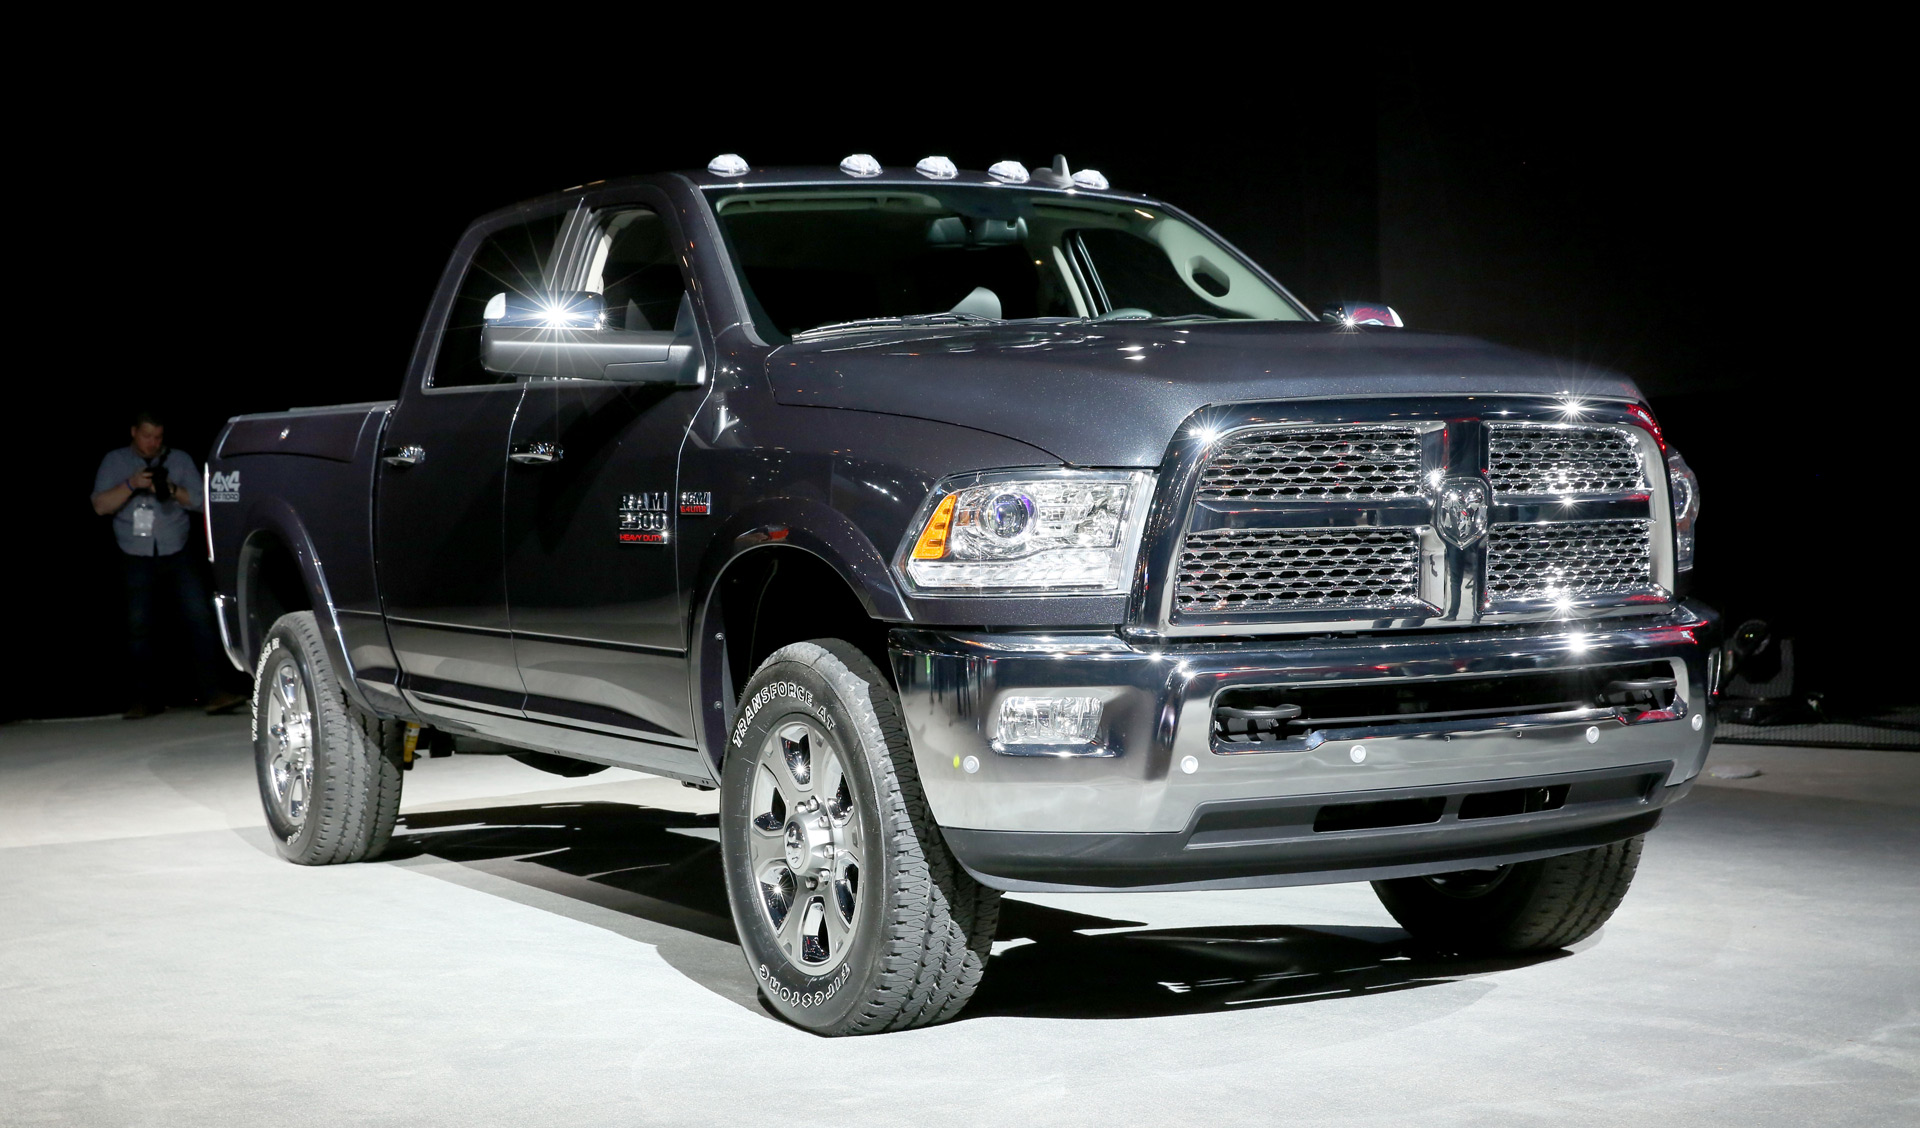 2017 Ram 2500 Off-Road rolls into Chicago